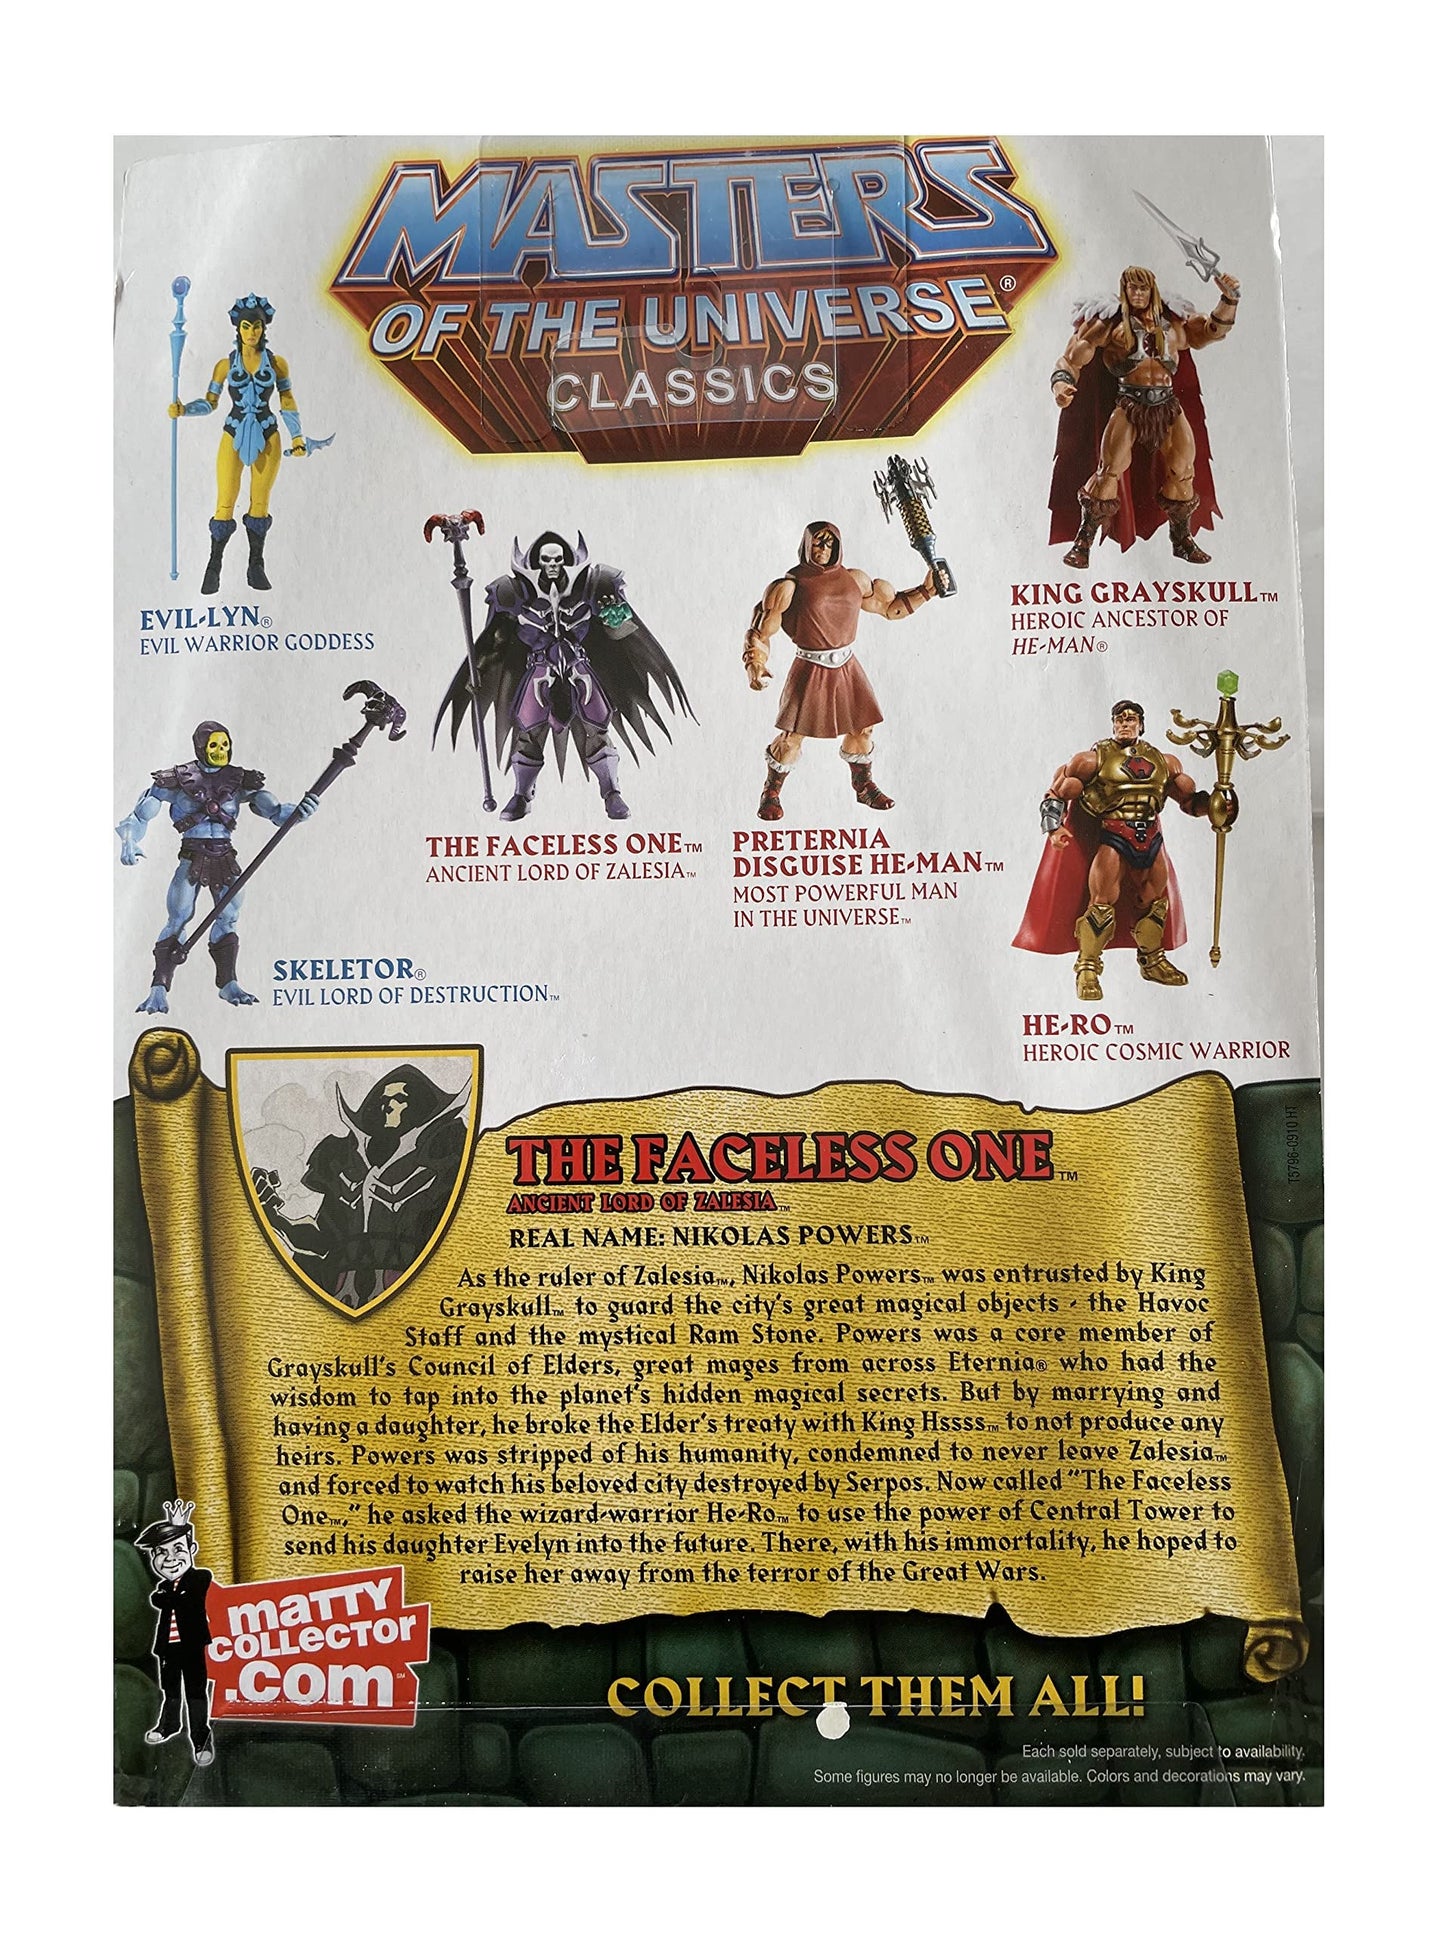 Vintage Mattel Masters Of The Universe Classics - The Faceless One Action Figure - Brand New Factory Sealed Shop Stock Room Find